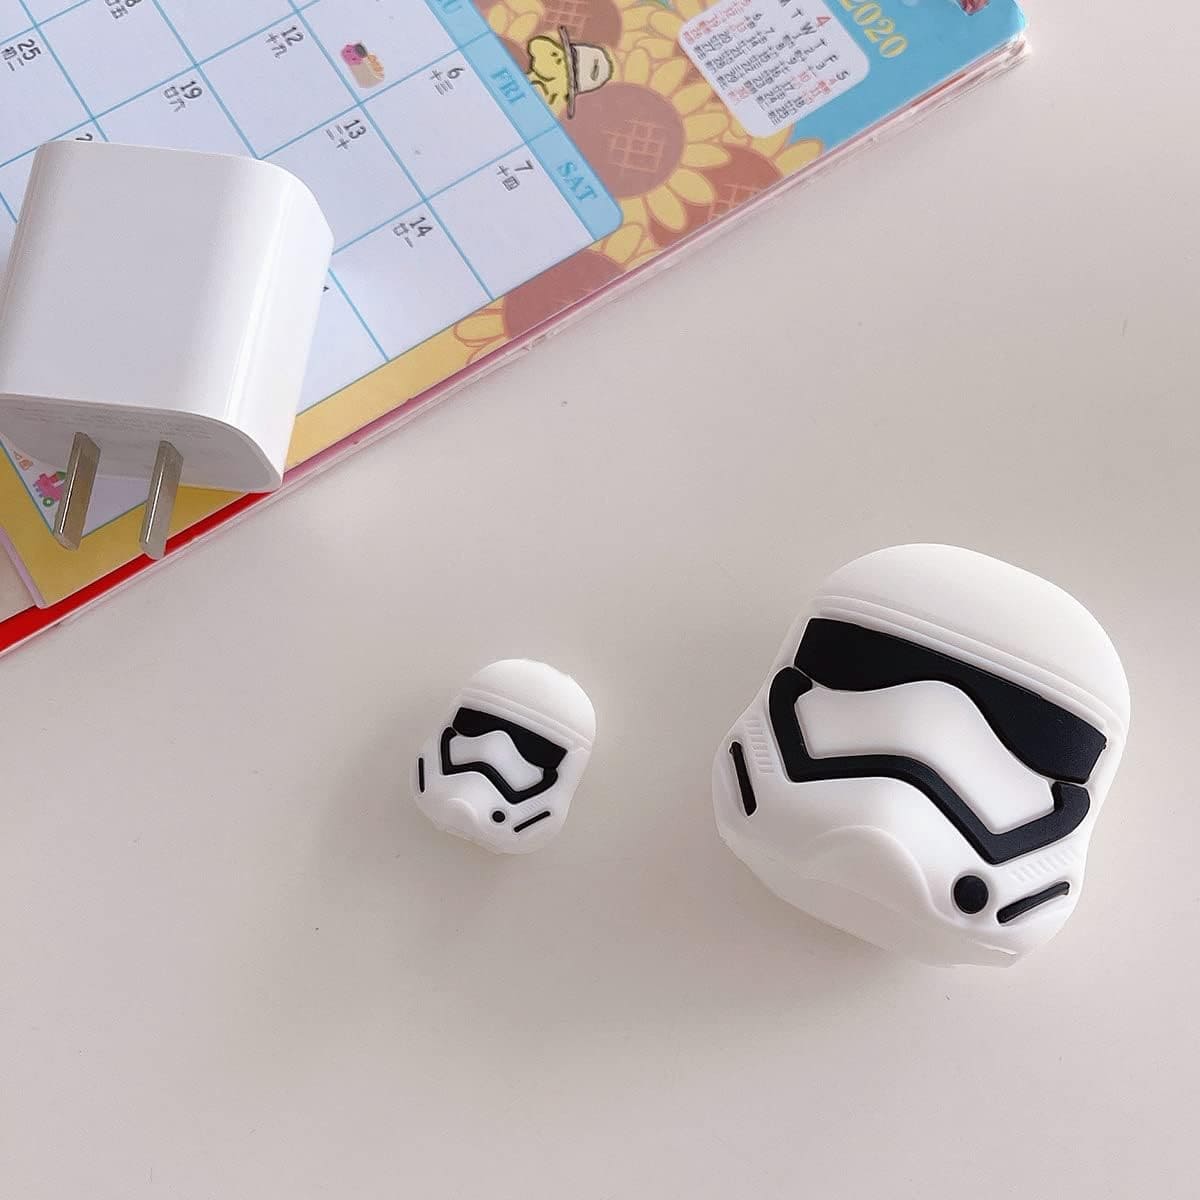 Stormtrooper Apple Charger Cover For 18-20W from hanging owl